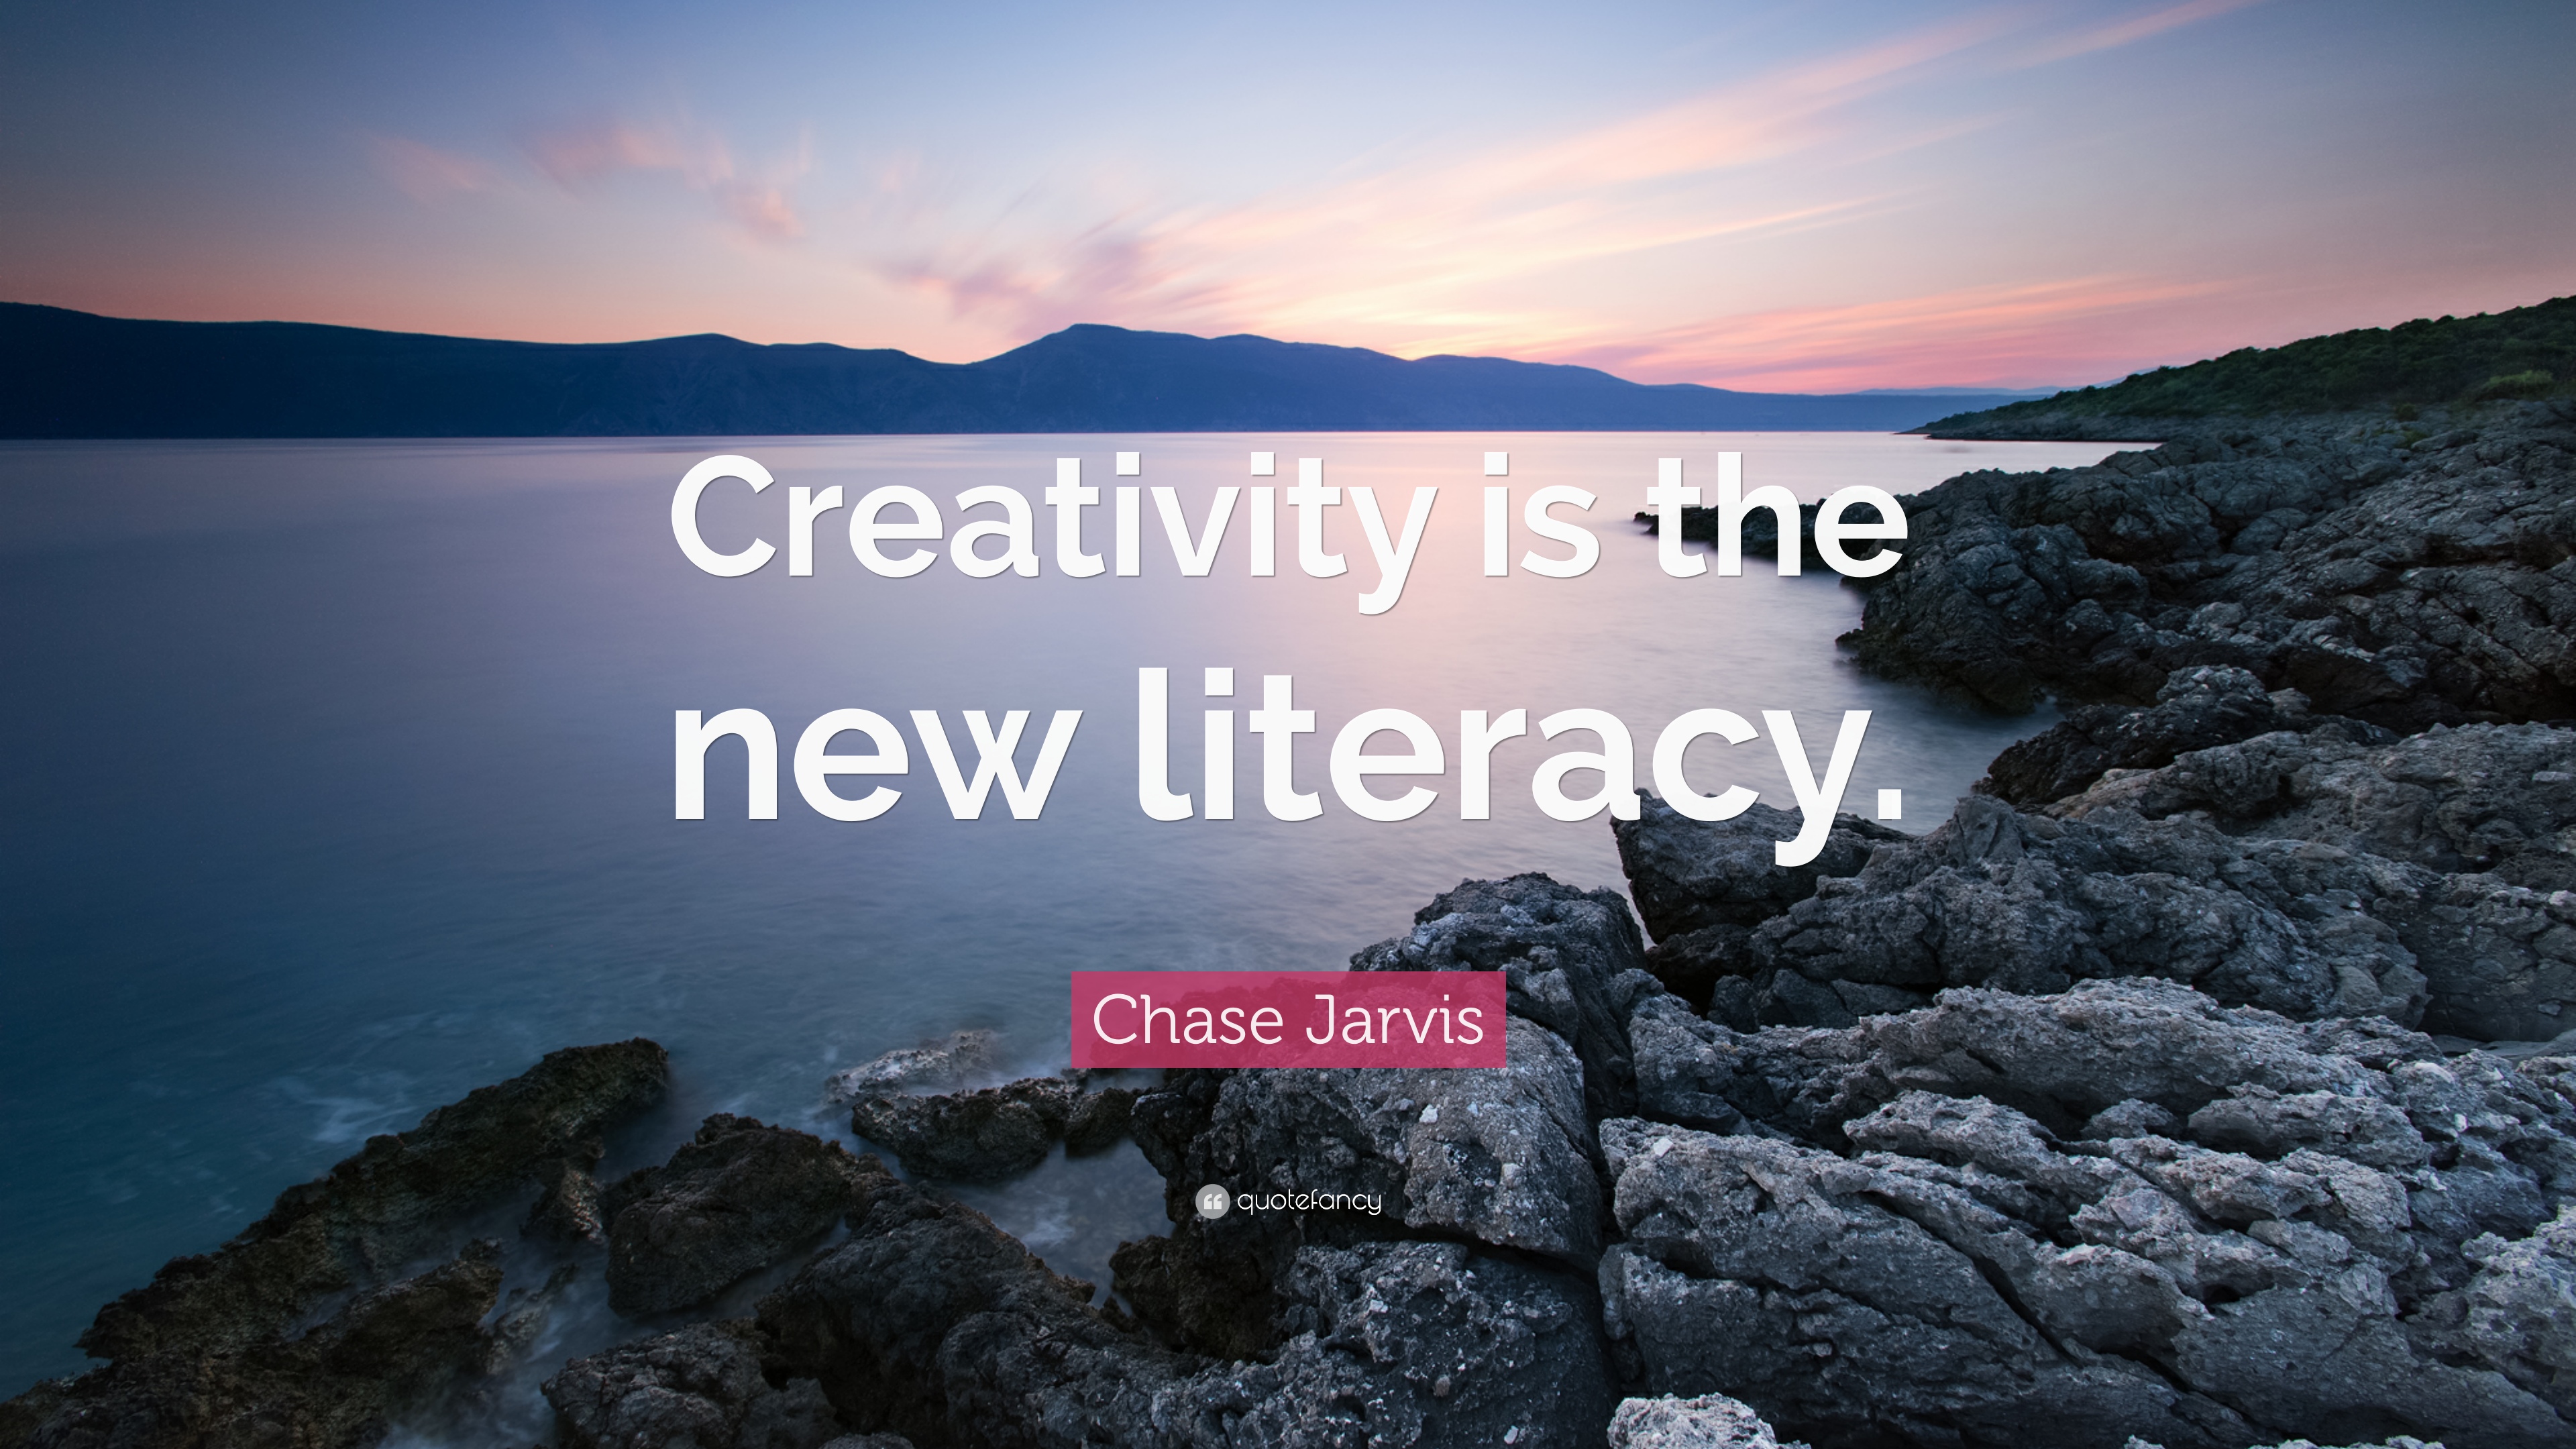 Chase Jarvis Quote: “Creativity is the new literacy.” 9